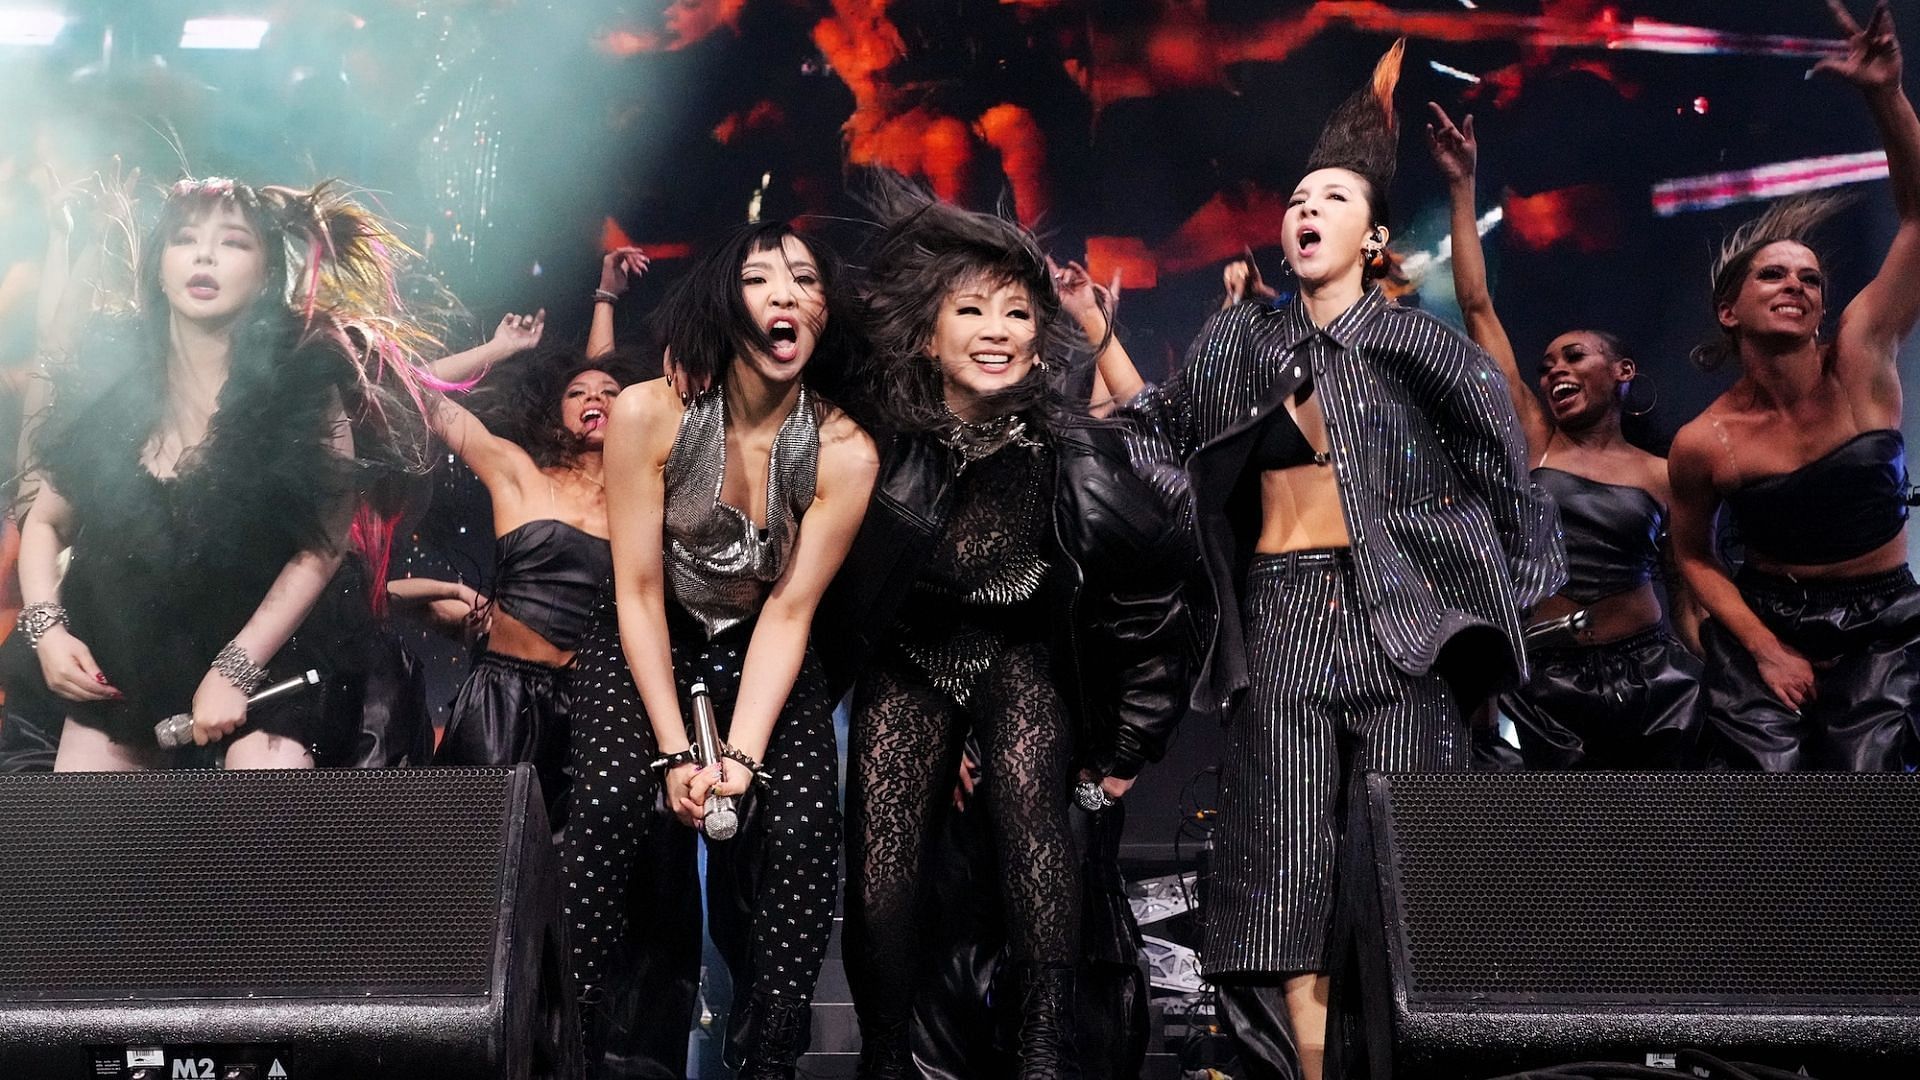 2NE1 performing at Coachella 2022 (Image via Kevin Mazur/Getty Images)